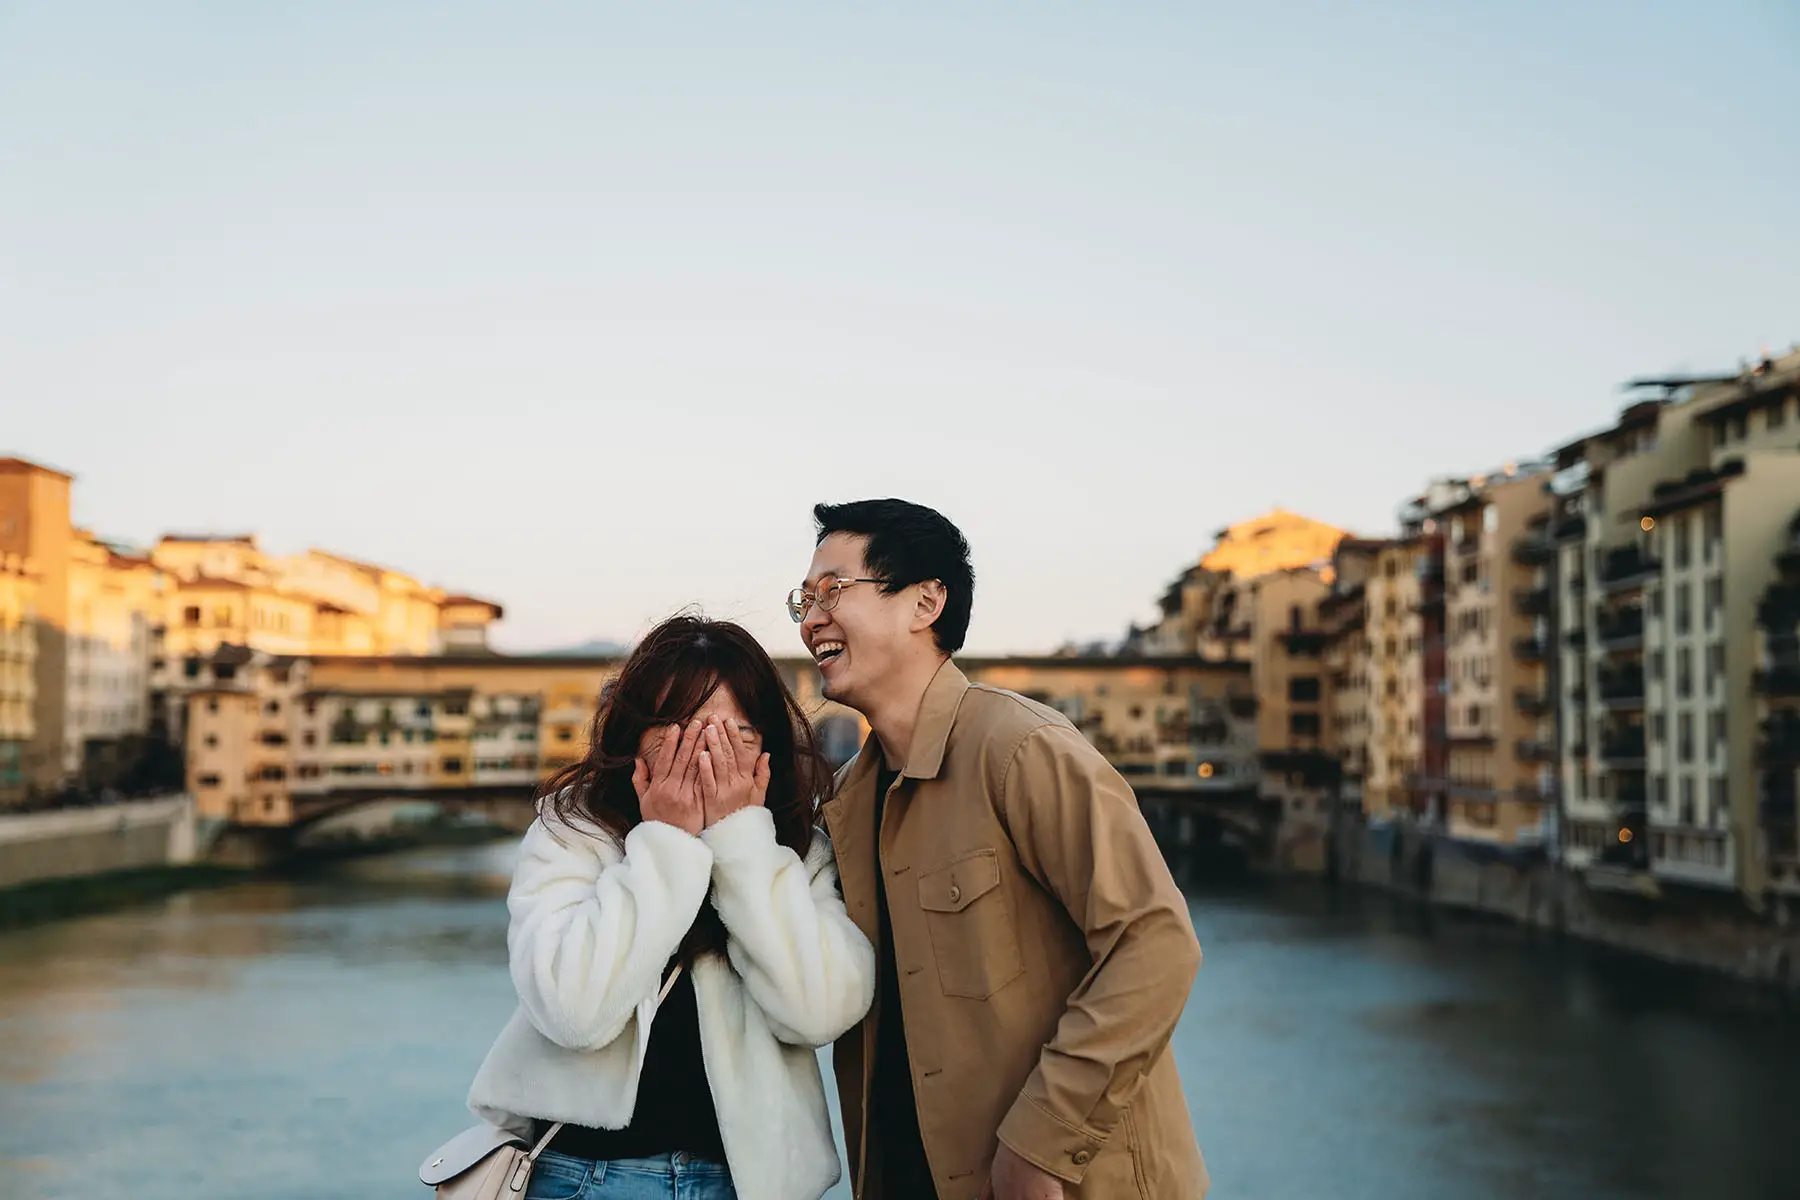 Cute couple is laughing together with Ponte Vecchio (Florence, Italy) in the background. The woman is hiding her face.